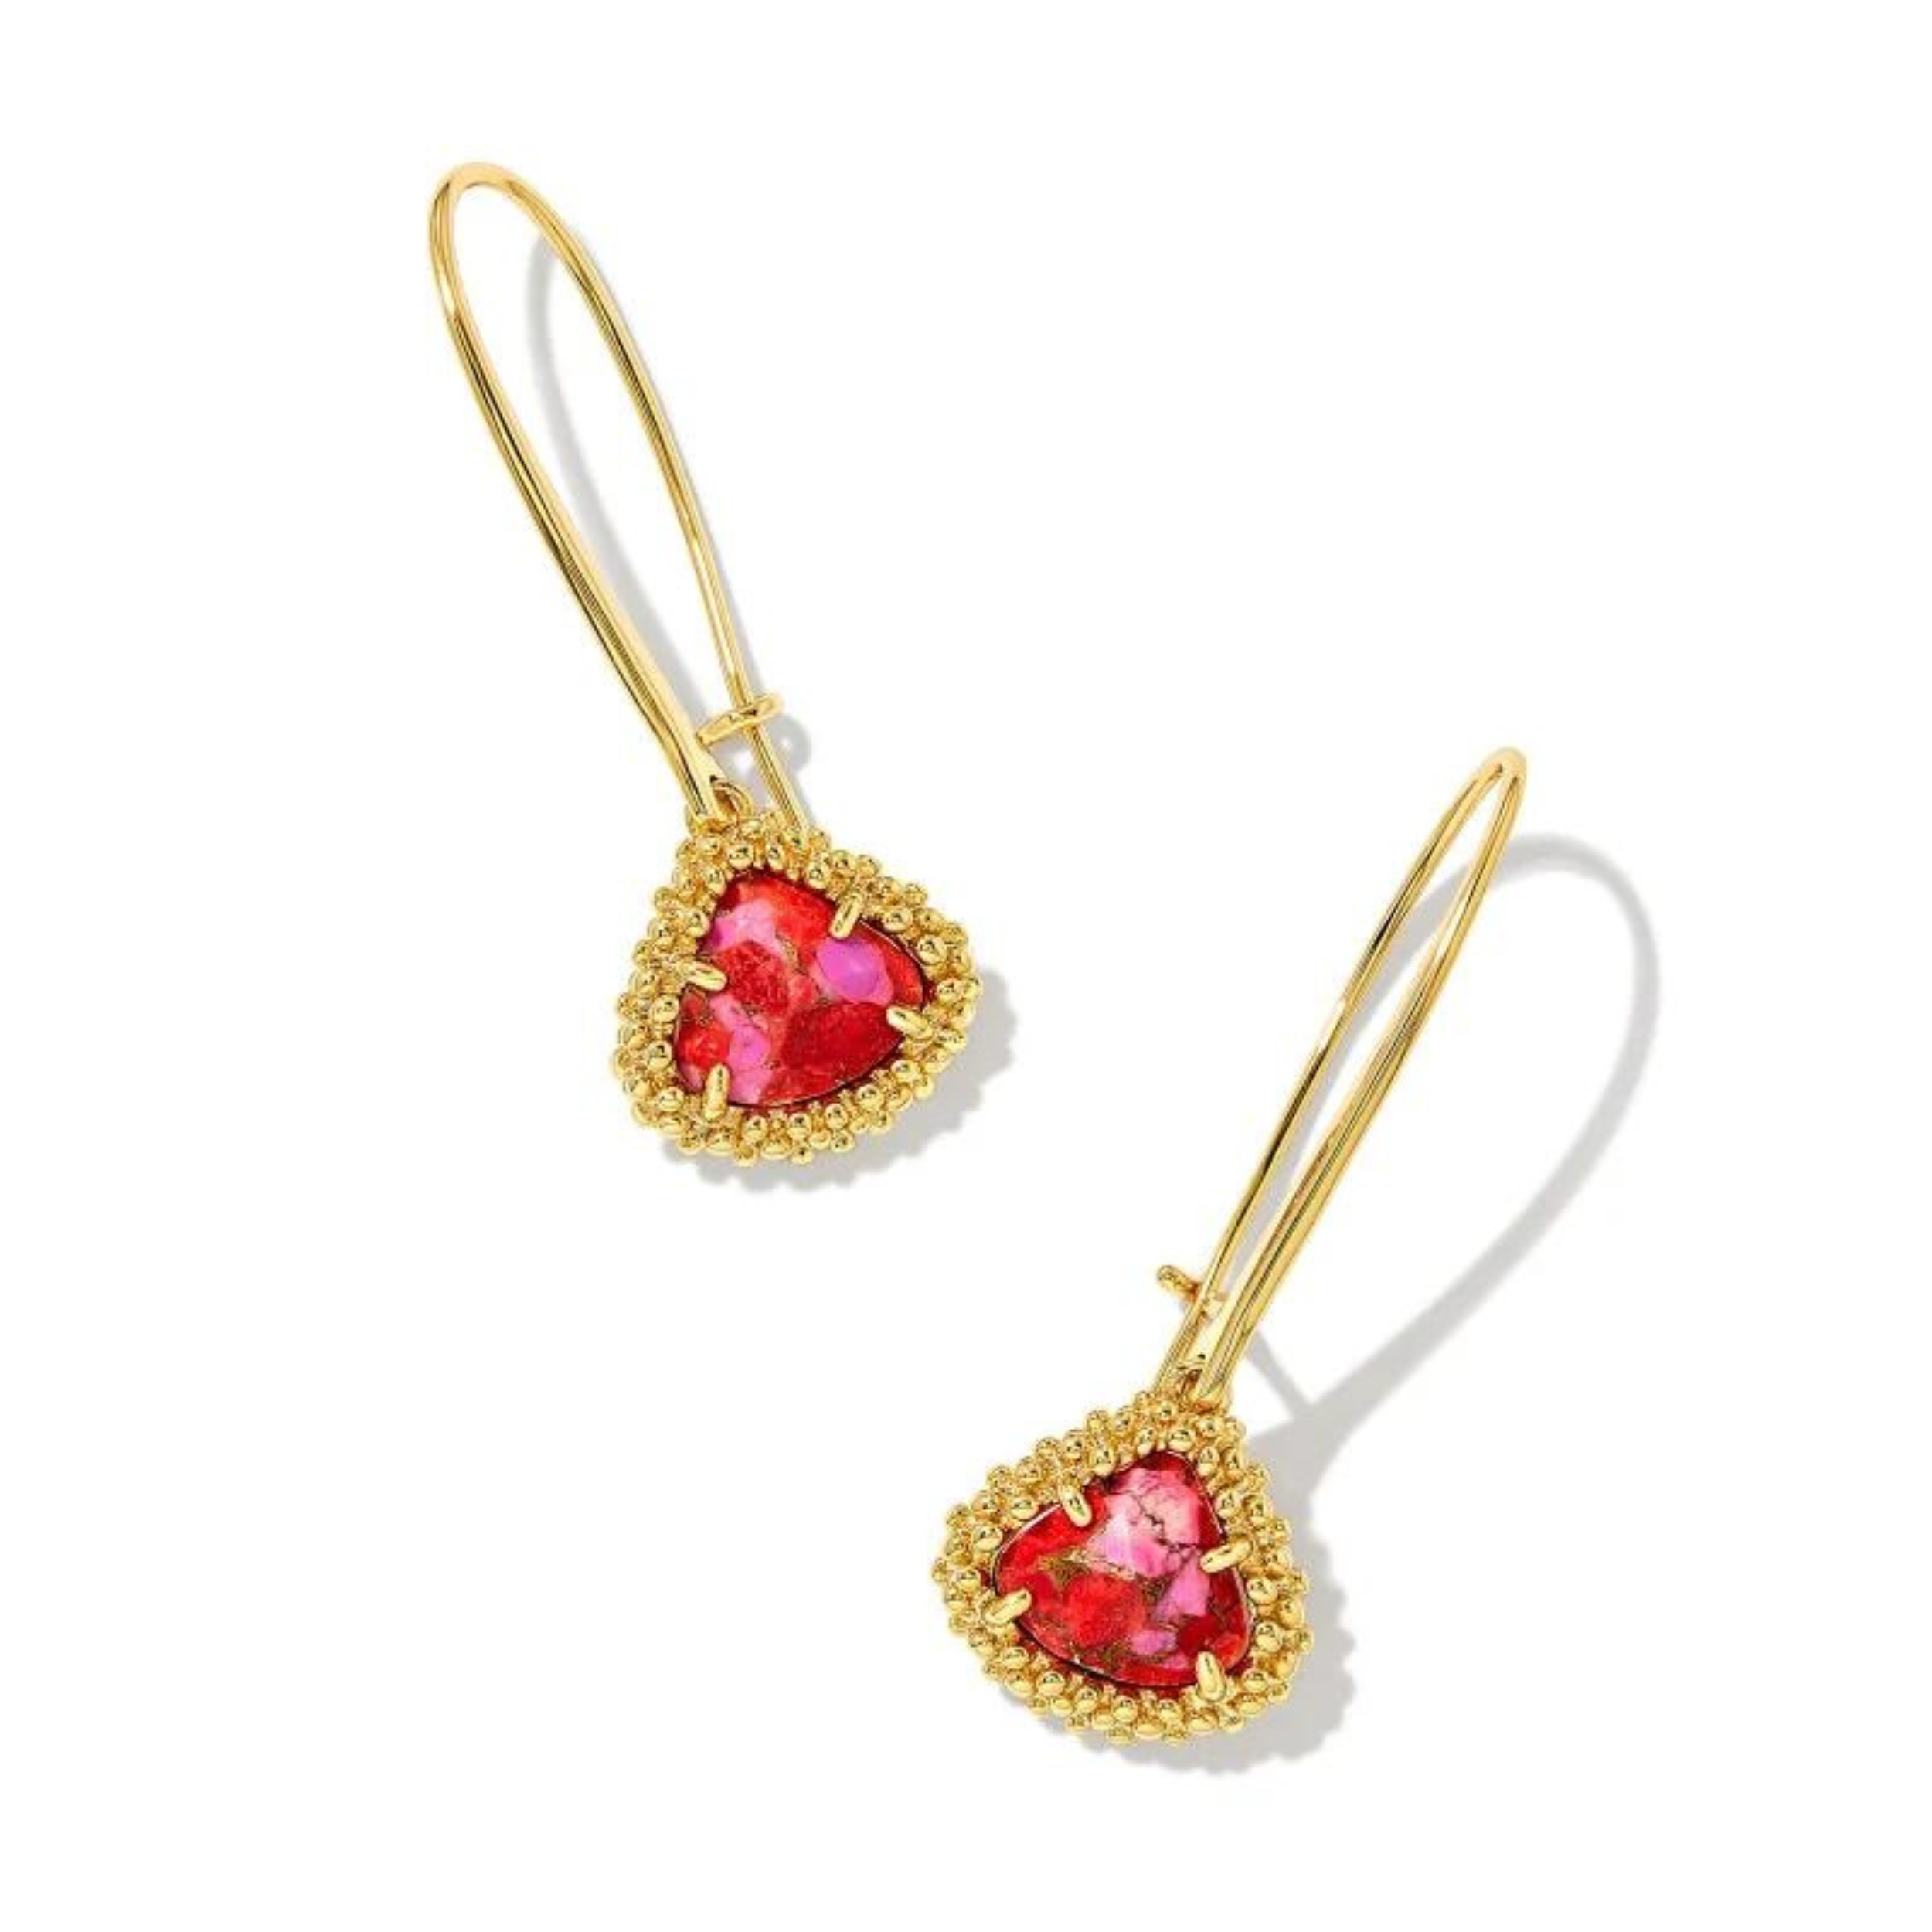 Kendra Scott | Framed Kendall Gold Wire Drop Earrings in Bronze Veined Red and Fuchsia Magnesite. Pictured on a white background.